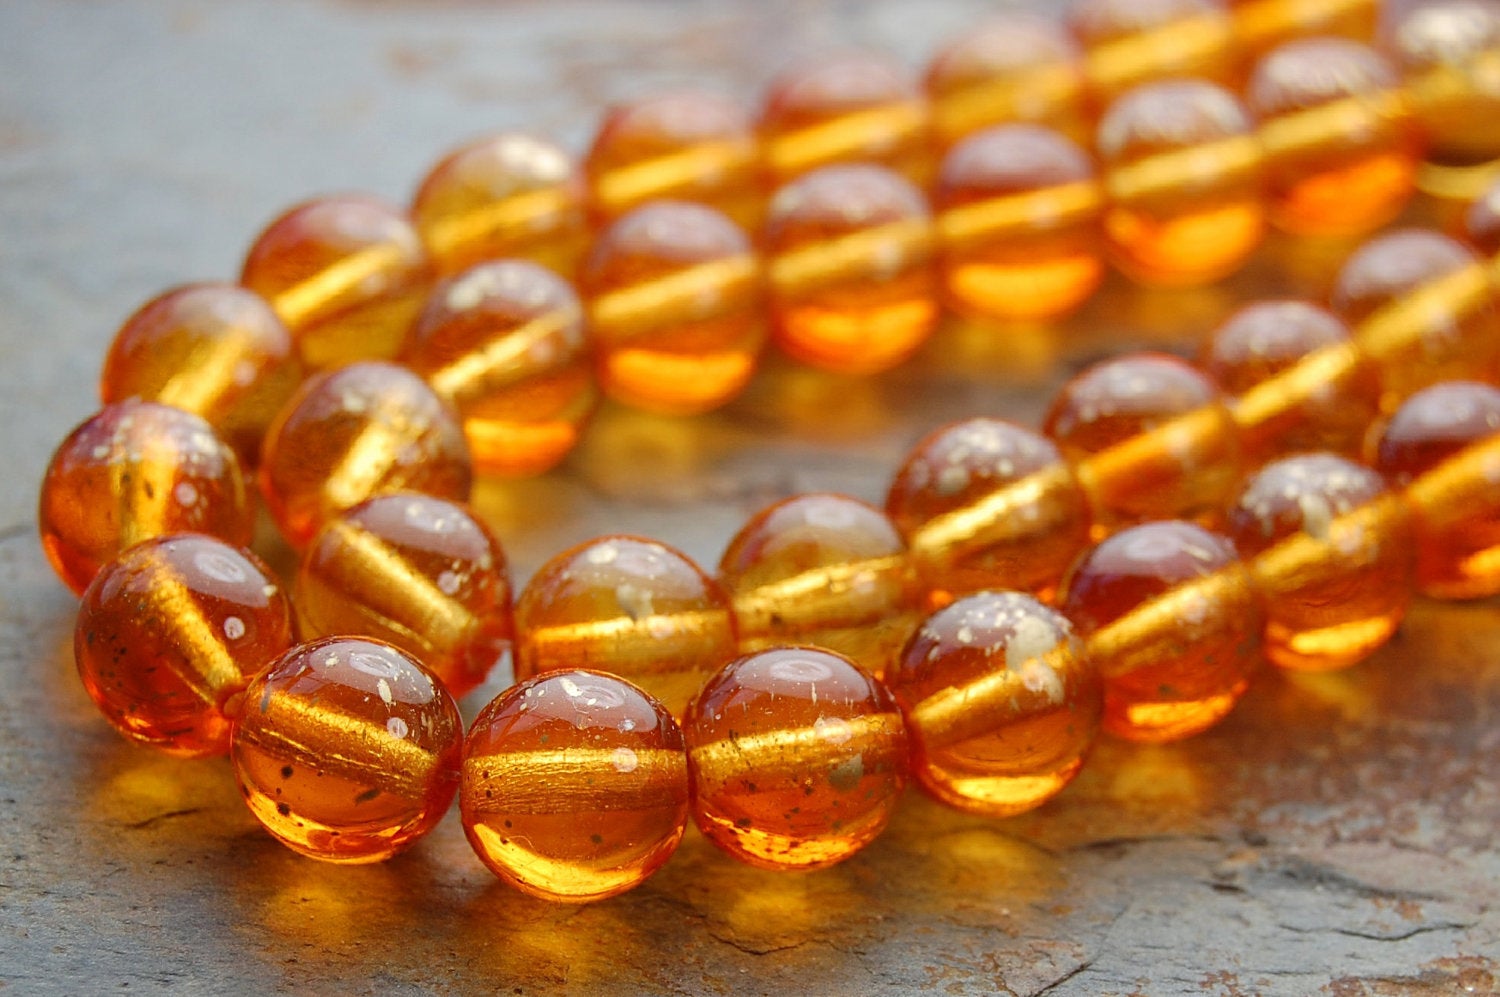 8mm Czech Glass Round Gold Dusted Amber Beads  -25